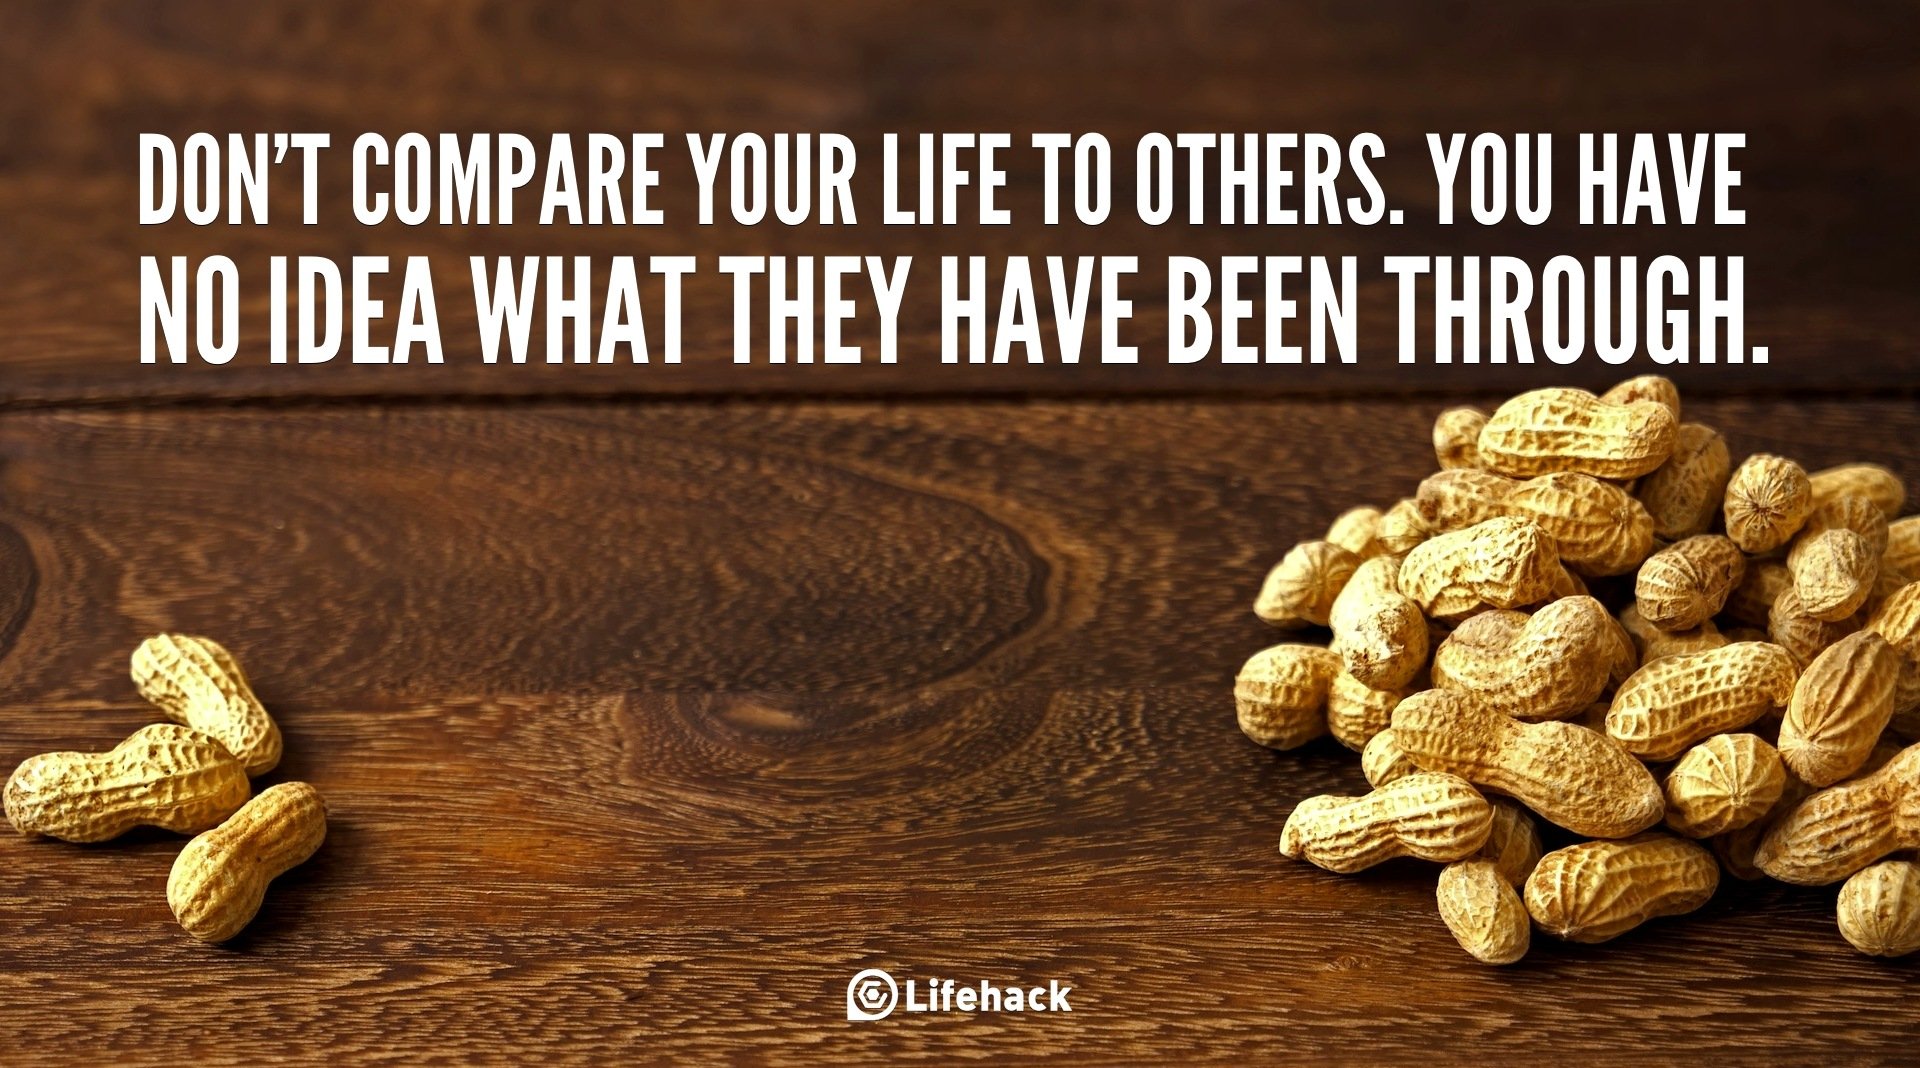 30sec Tip: Don’t Compare Your Life to Others